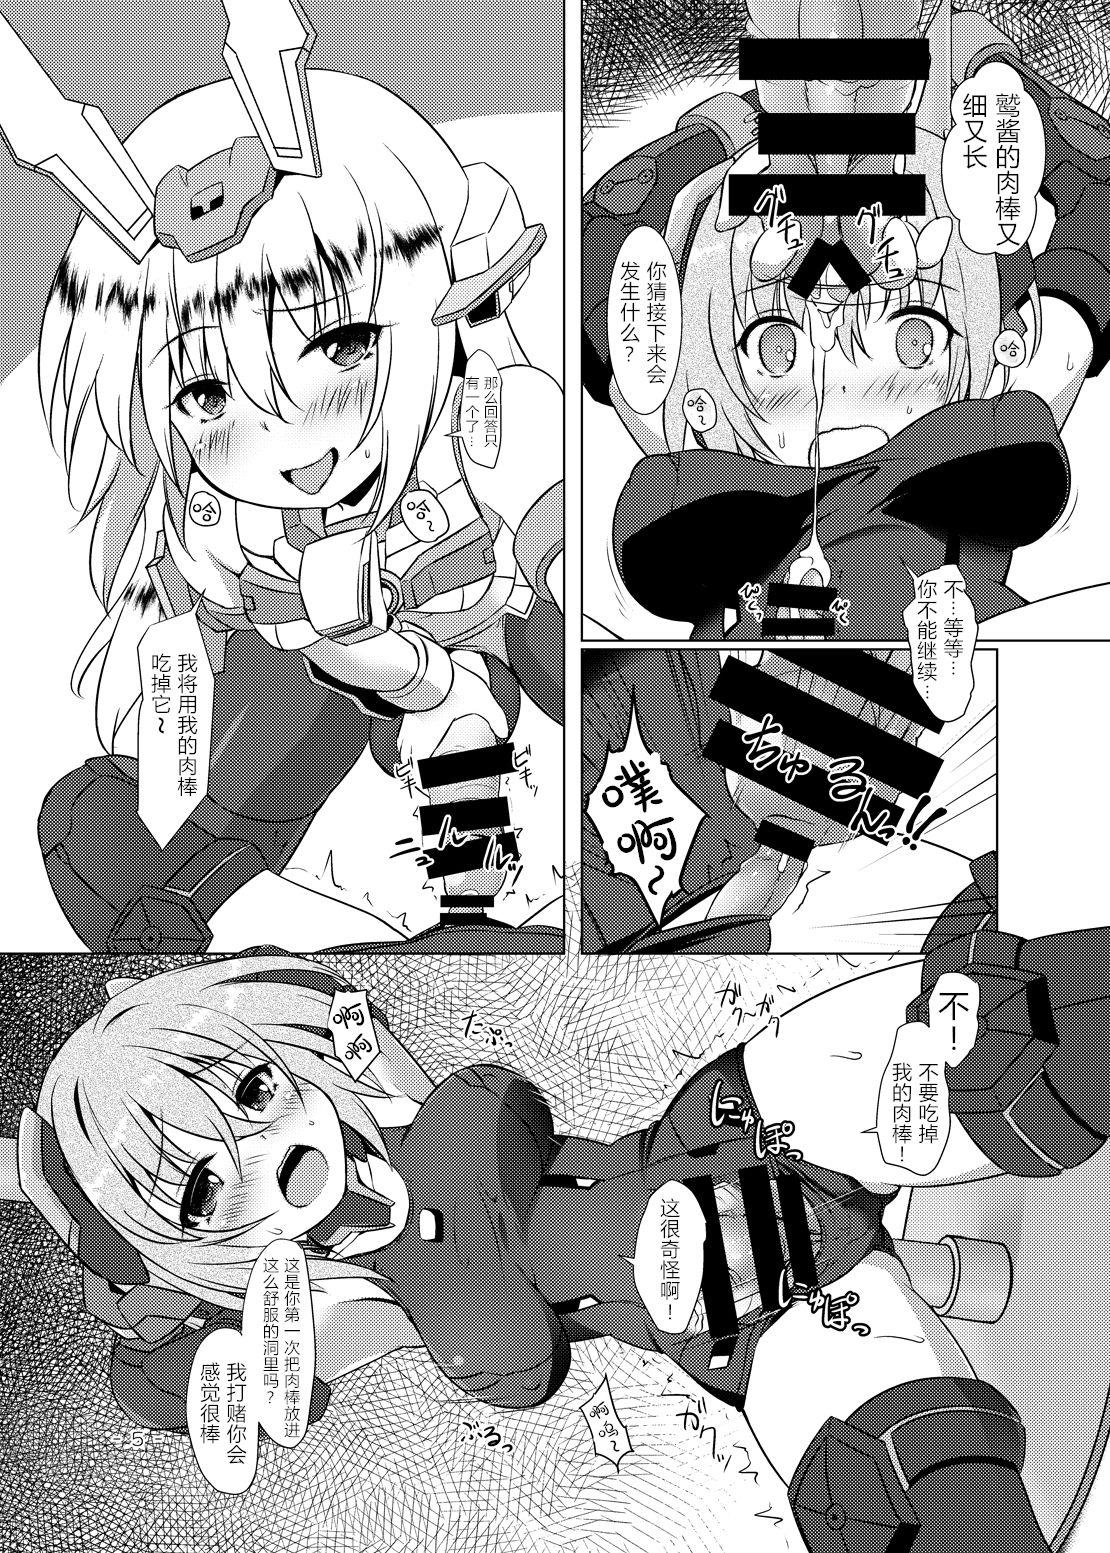 Exhibitionist BFAG 2 - Frame arms girl Fuck My Pussy - Page 6